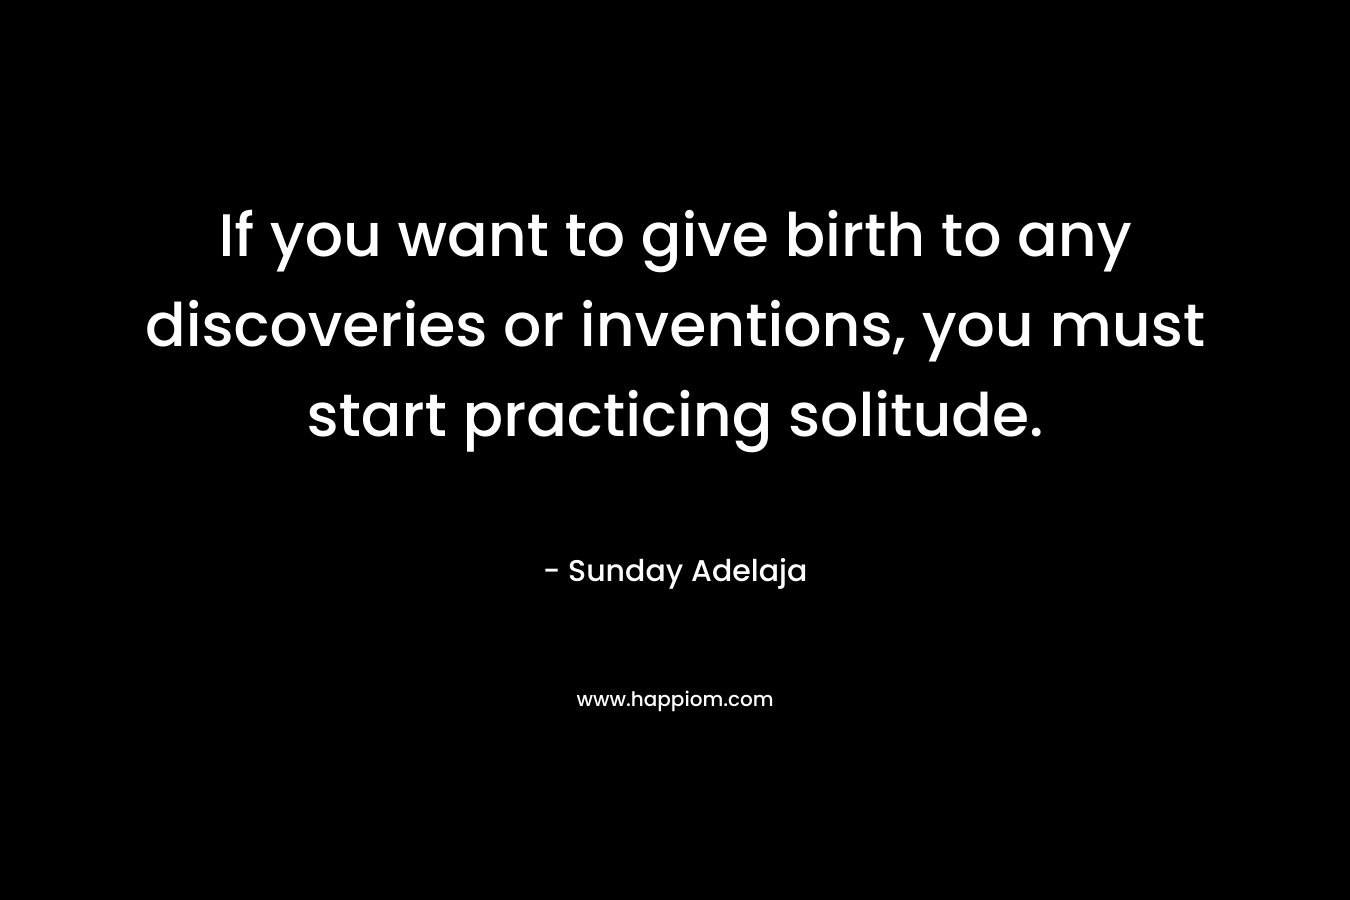 If you want to give birth to any discoveries or inventions, you must start practicing solitude. – Sunday Adelaja